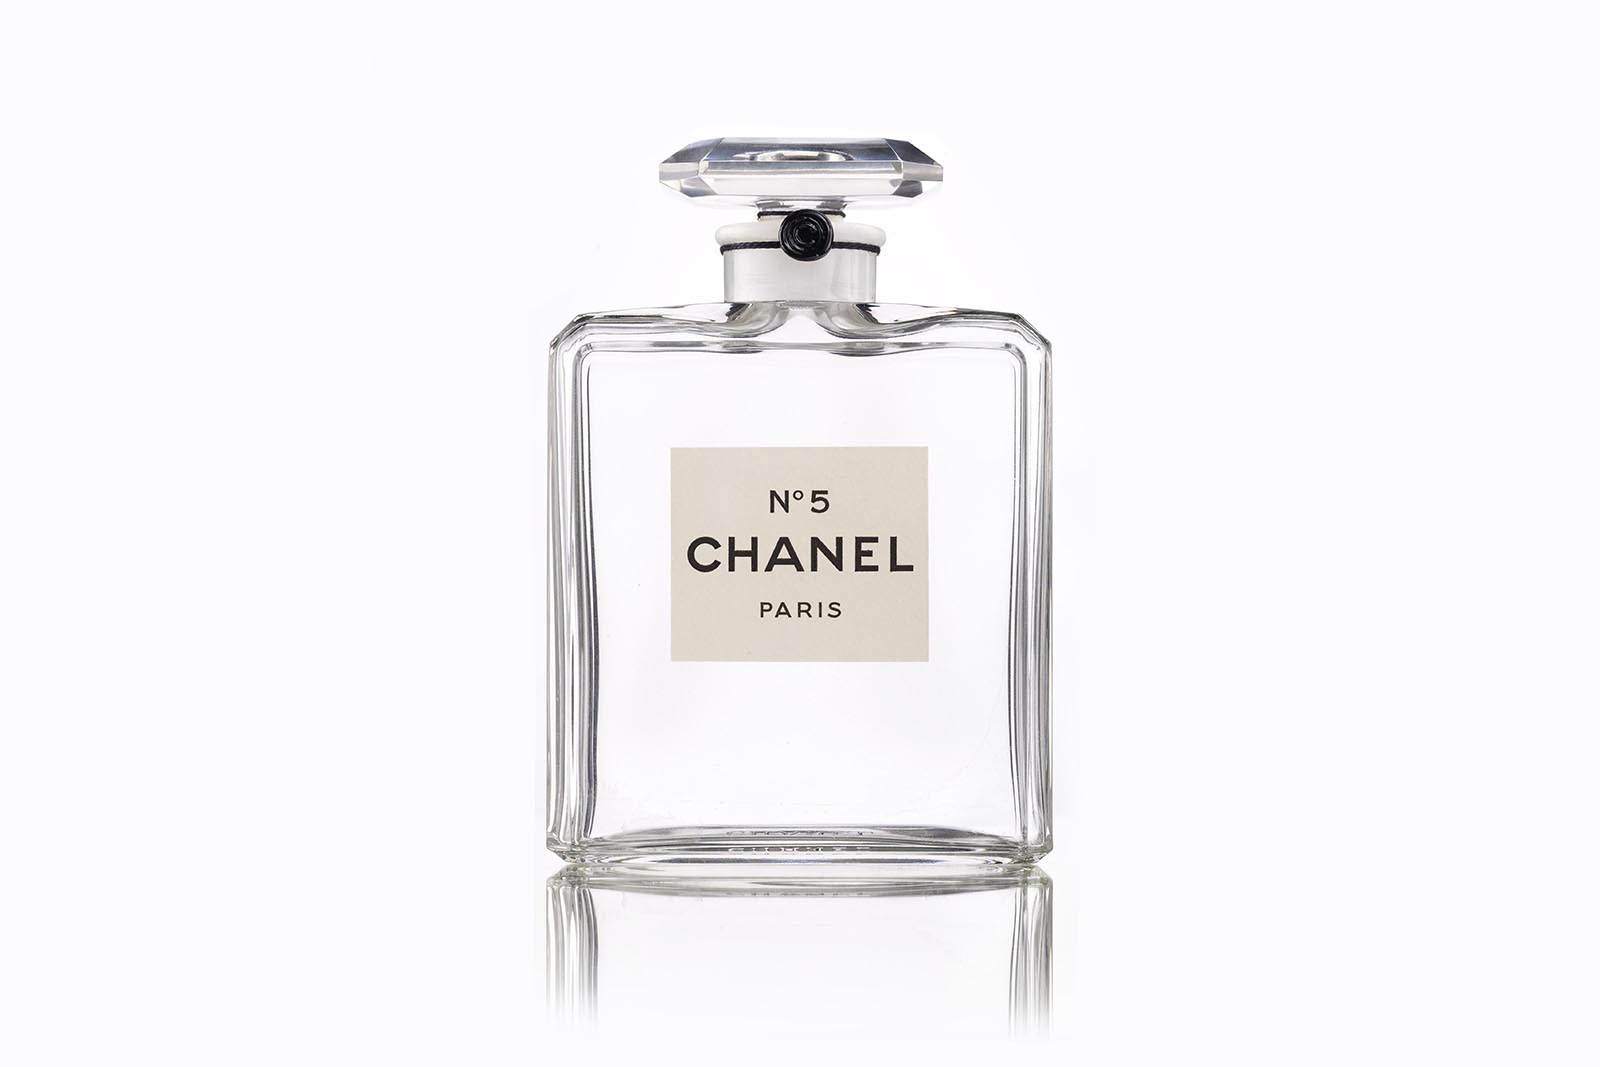 Chanel N°5 diamond necklace is an ode to the legendary perfume